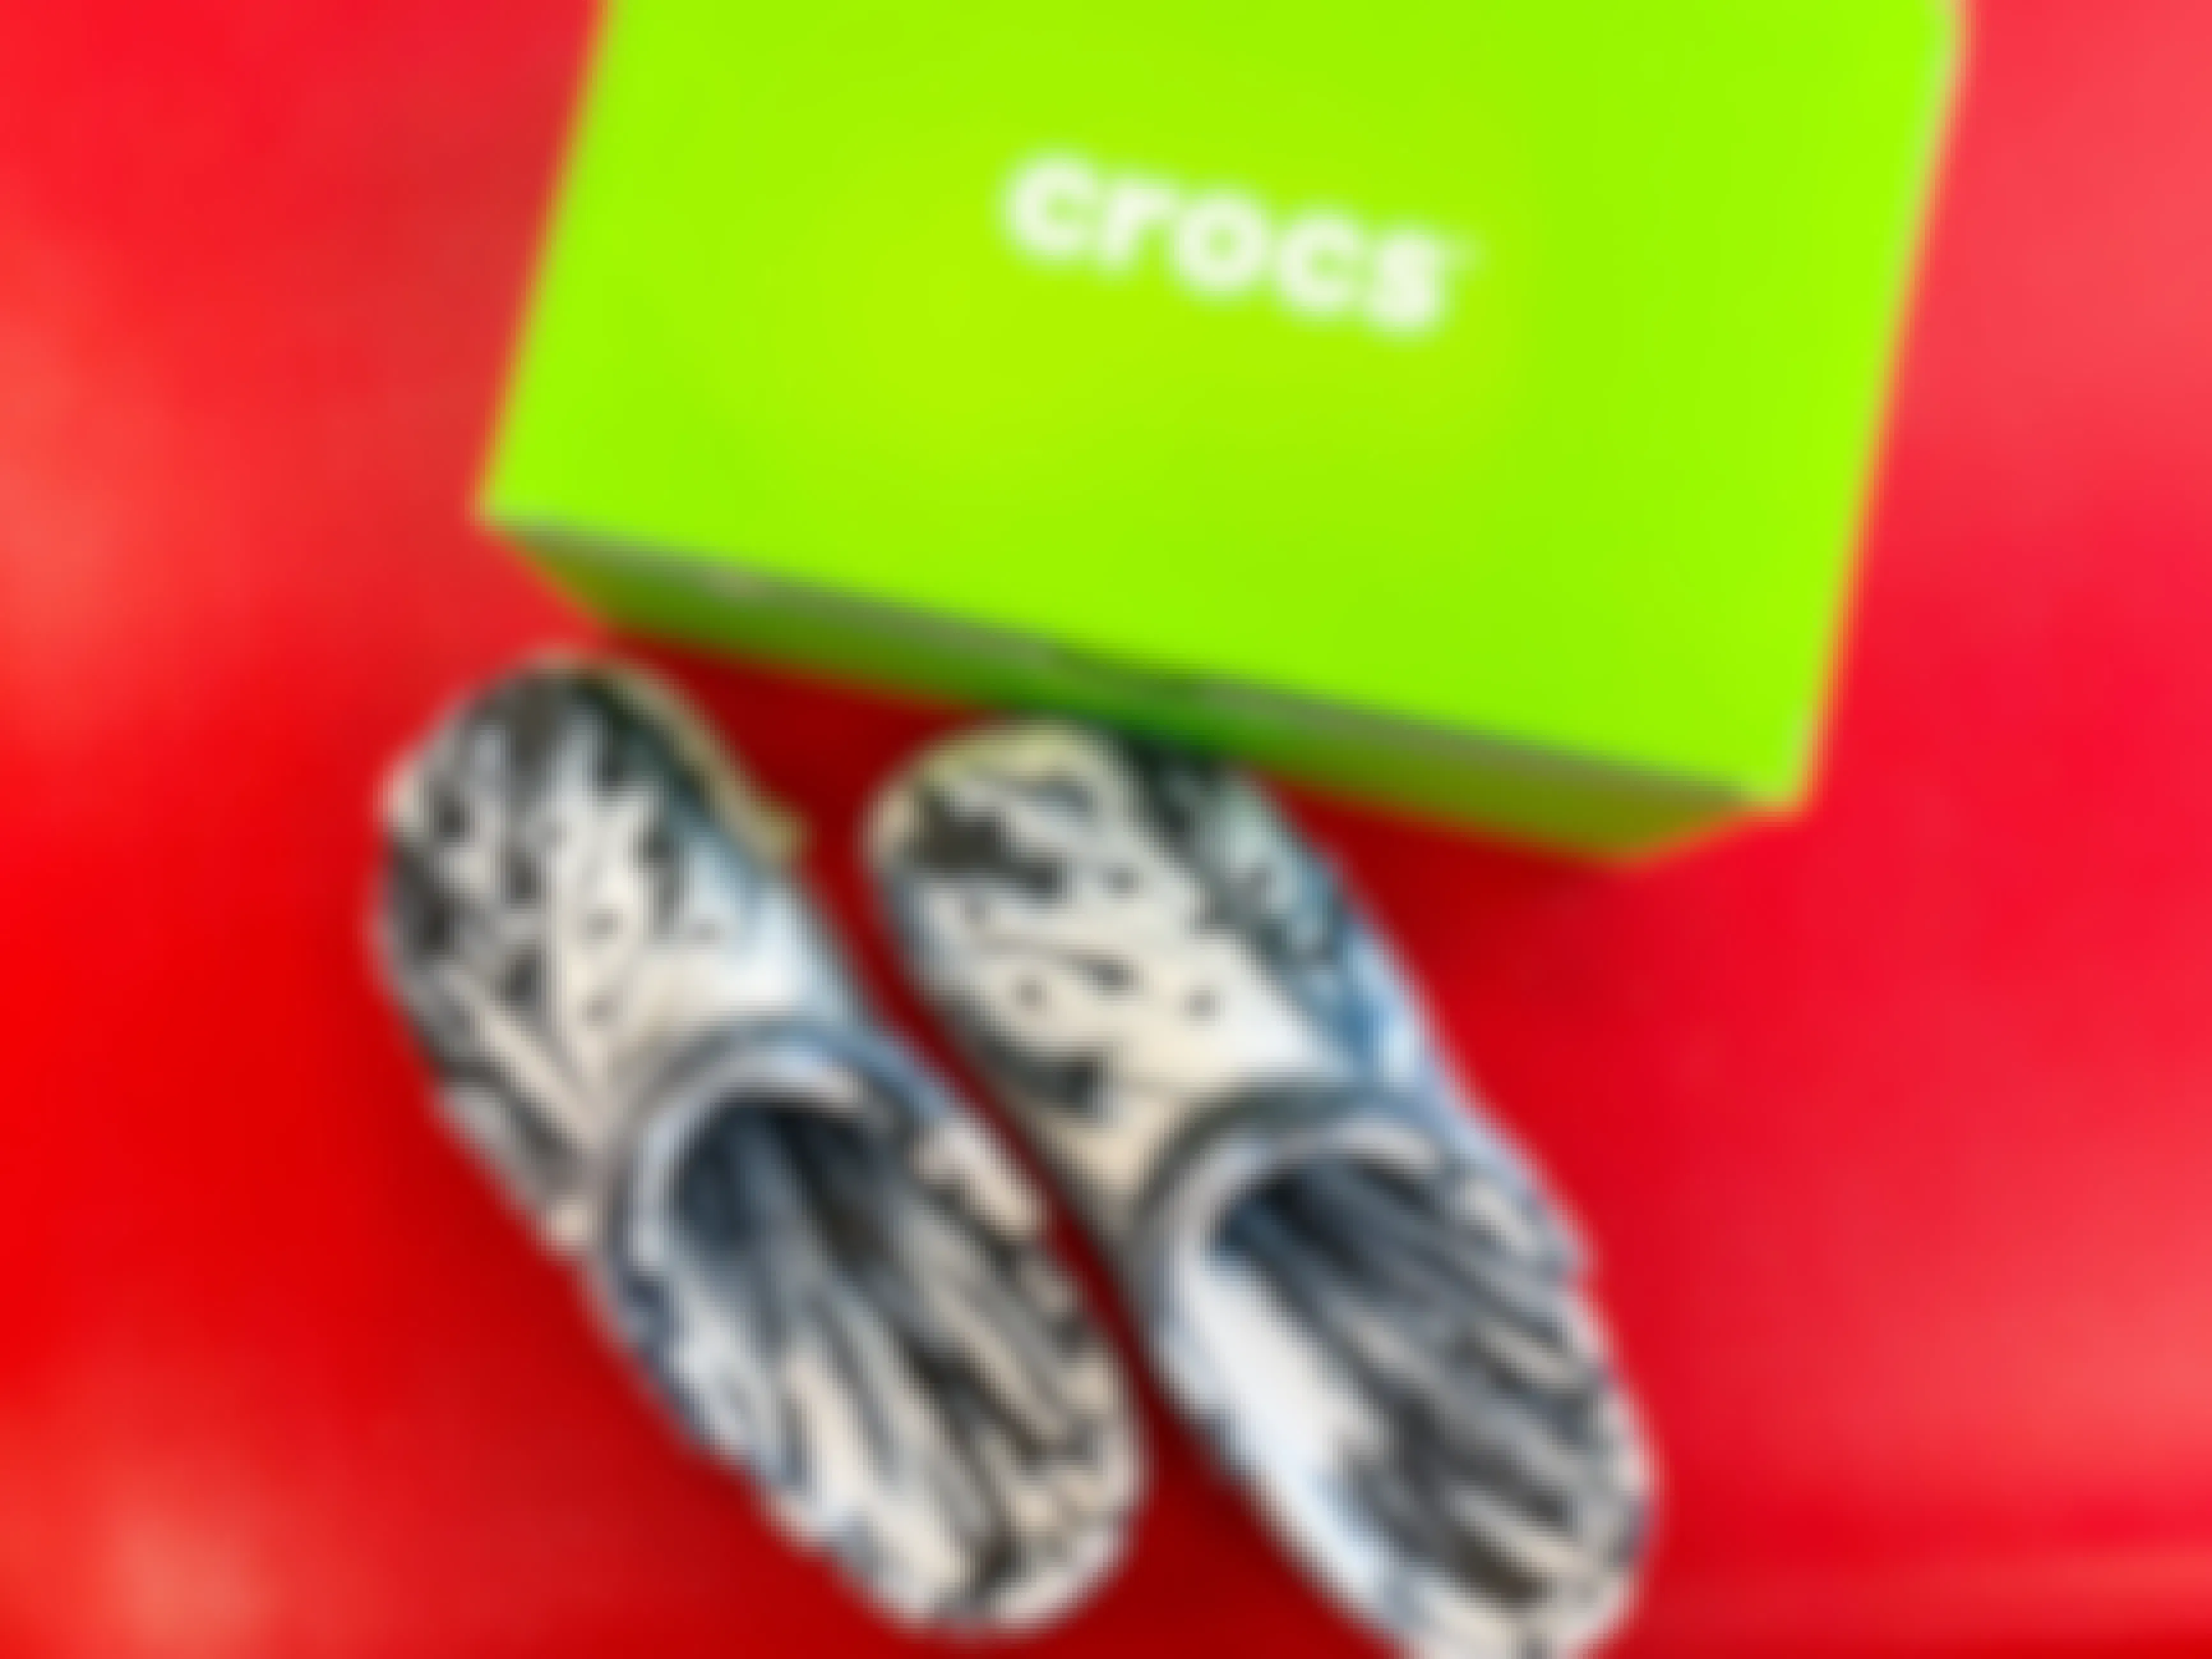 crocs clogs next to a green crocs box on a red surface